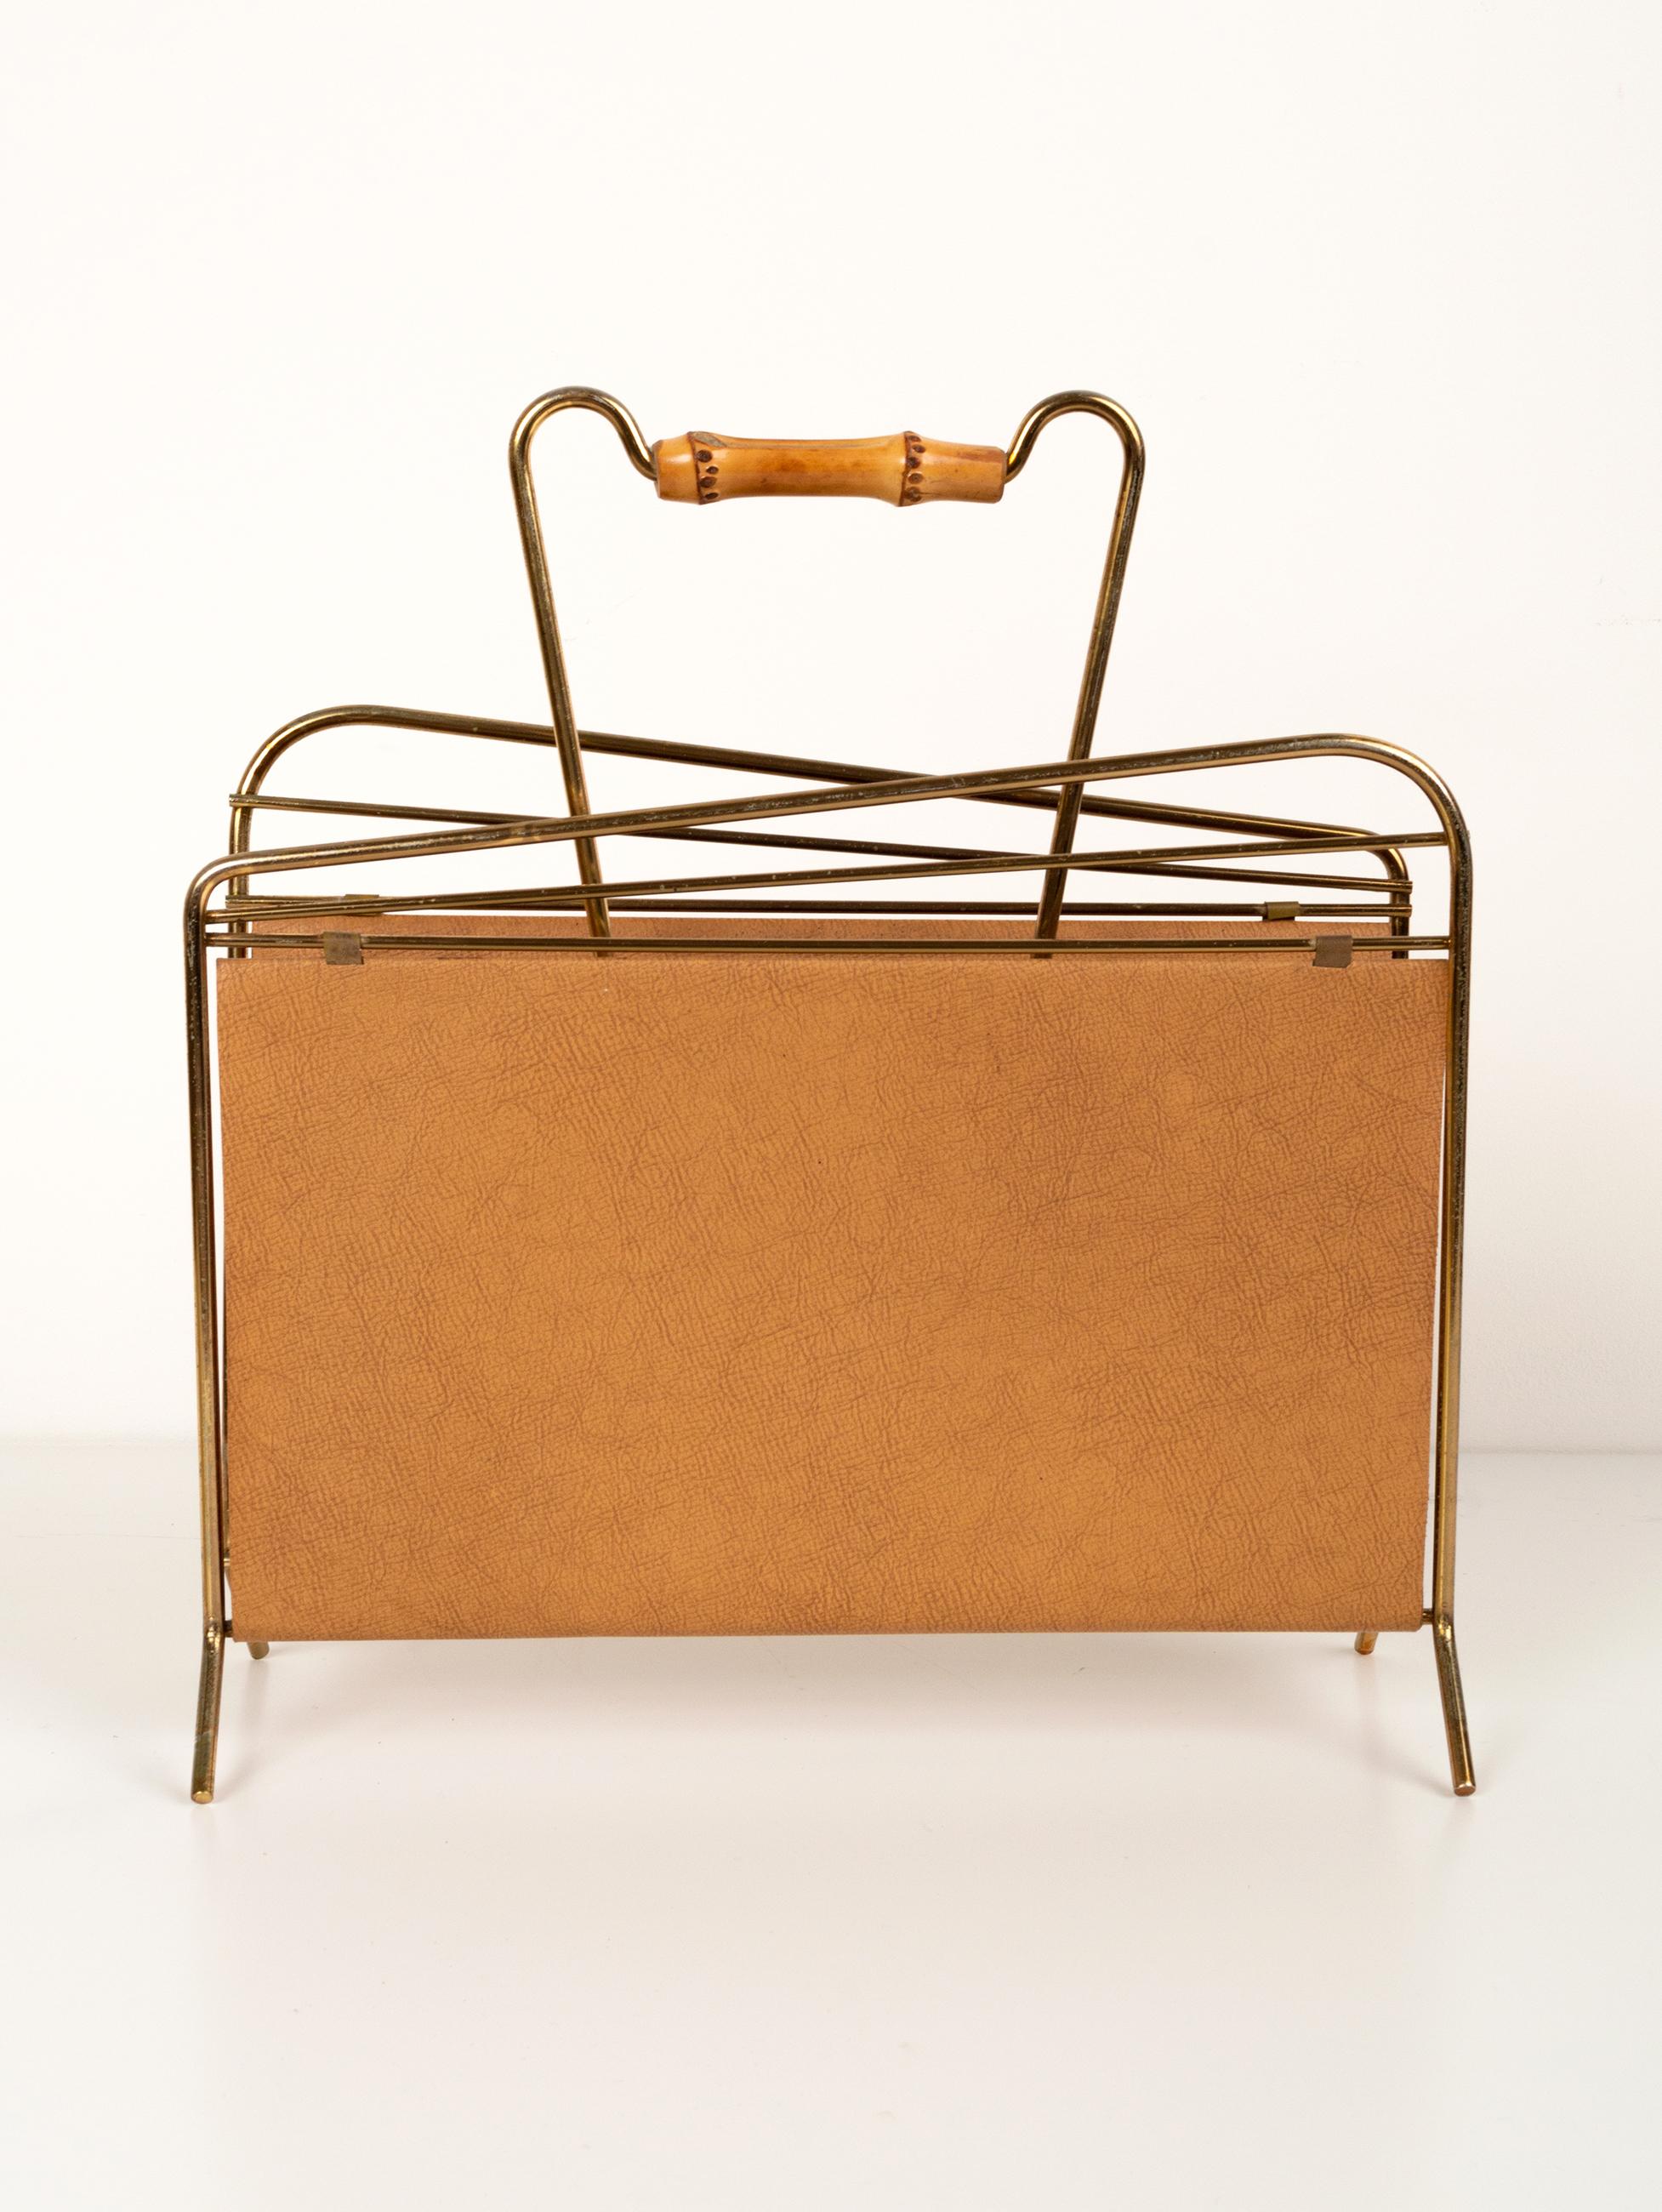 Mid century magazine rack stand, Austrian, Austria, C.1950.
Presented in excellent condition commensurate of age.